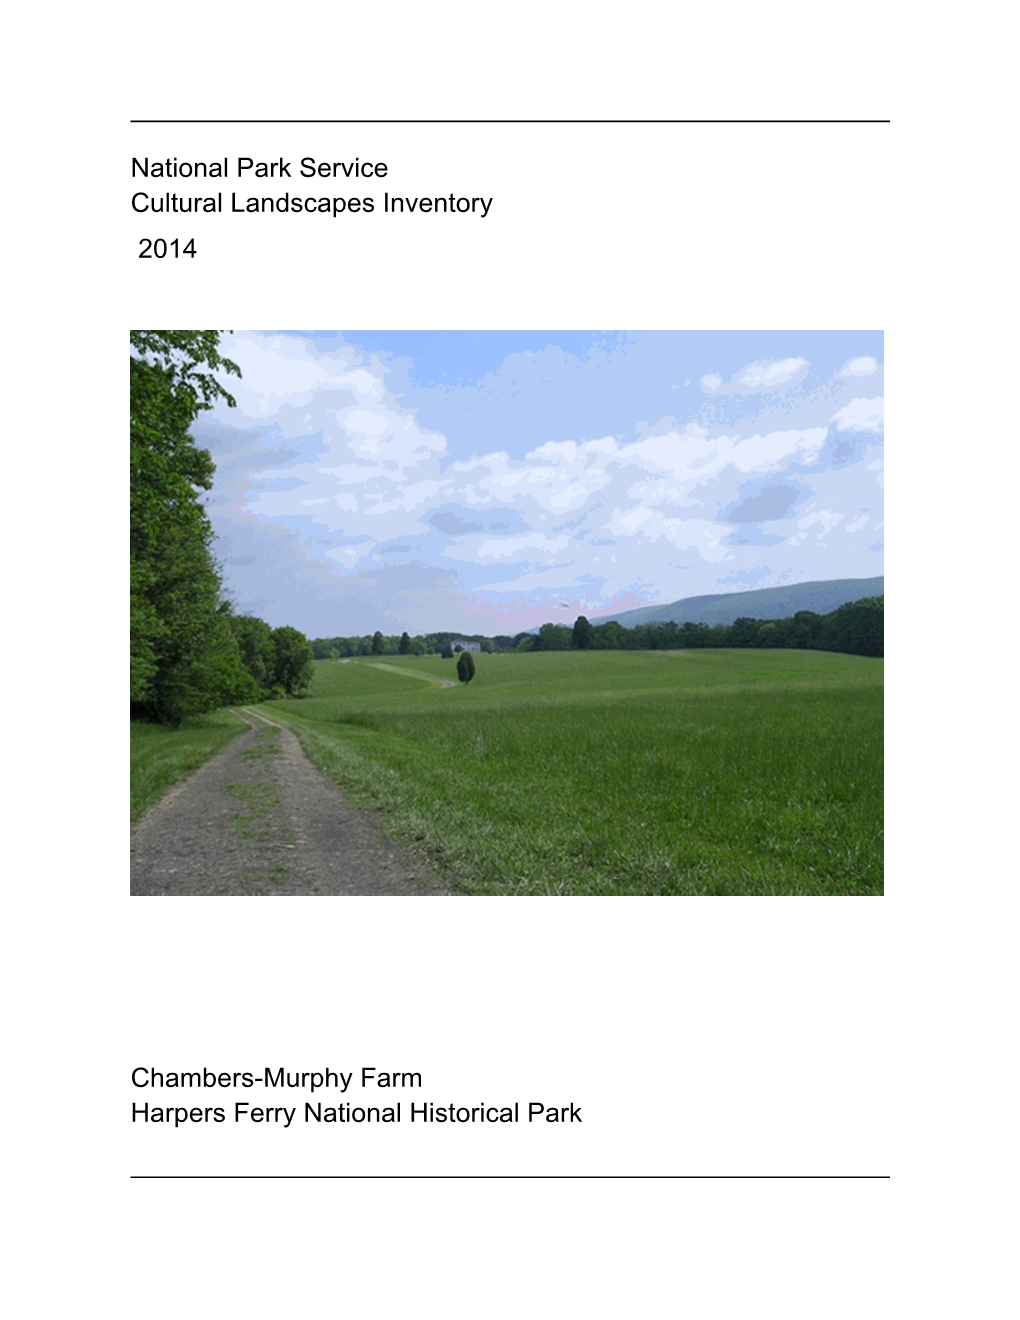 National Park Service Cultural Landscapes Inventory Chambers